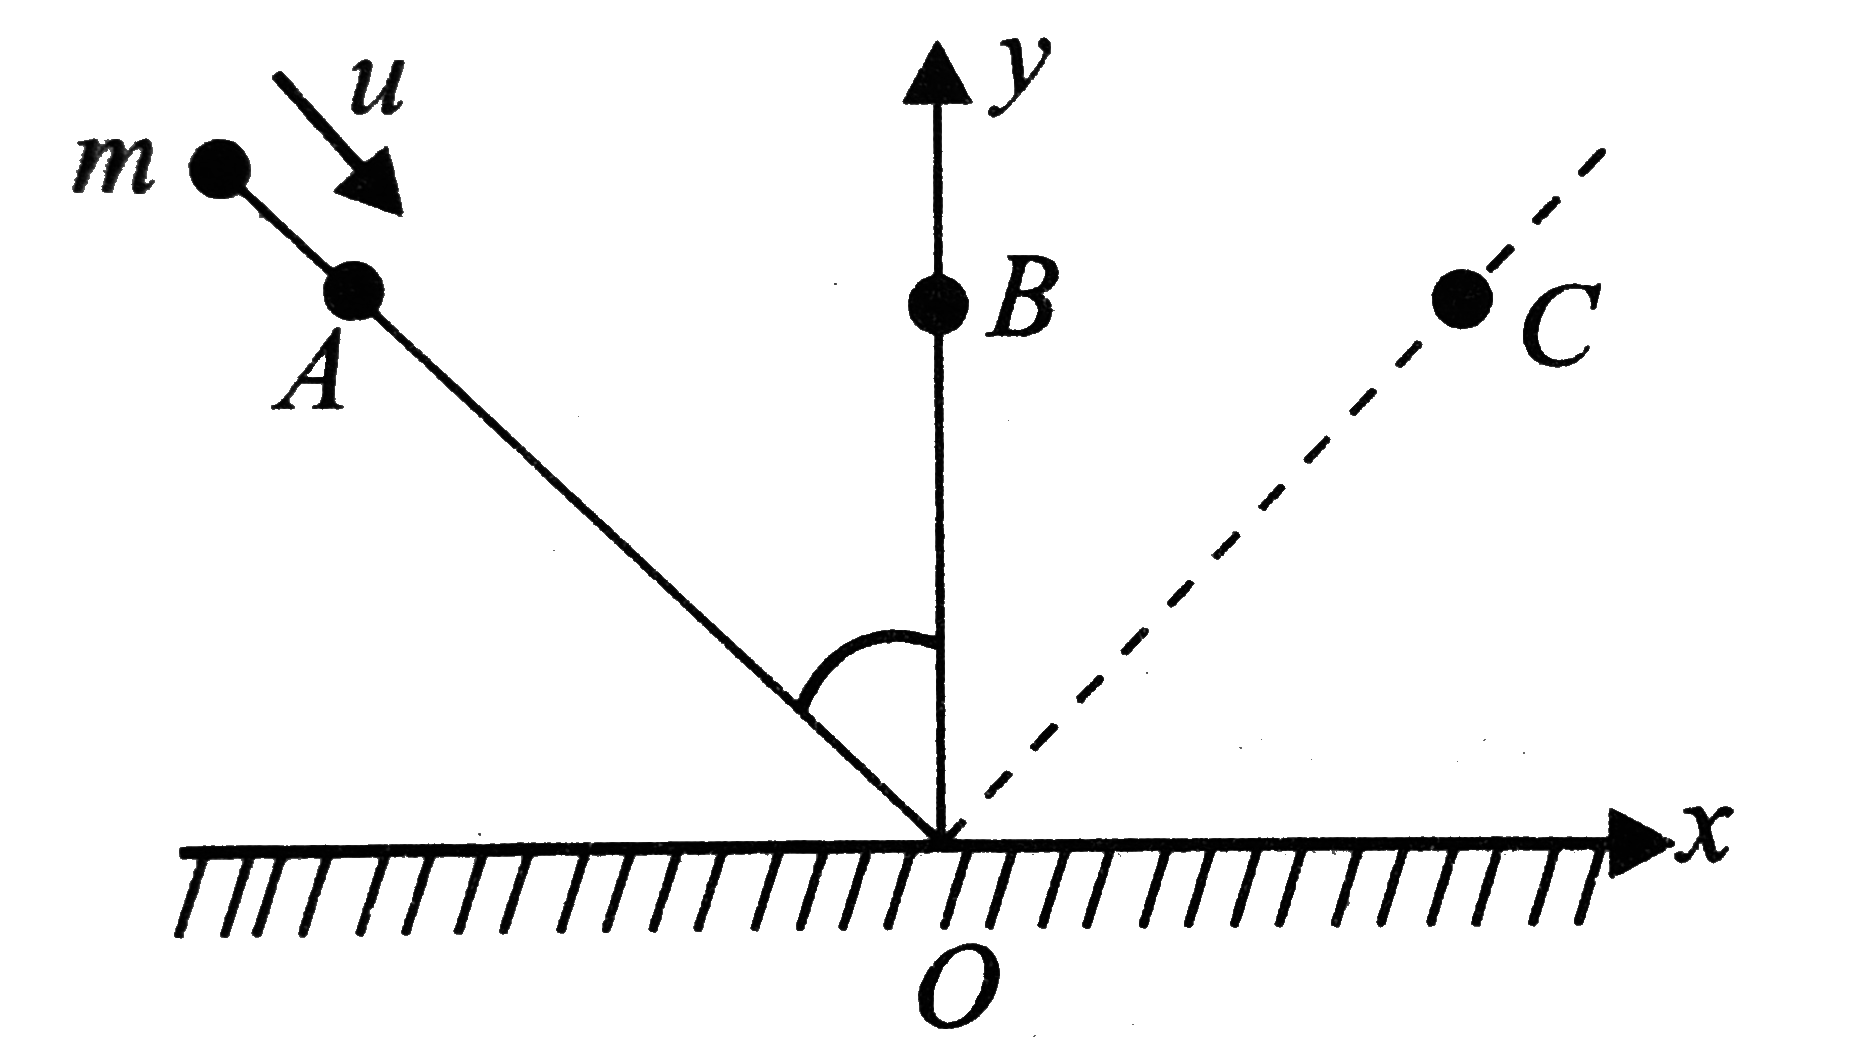 A ball of mass moving with constant velocity u collides with a smooth horizontal surface at O as shown in Fig. Neglect gravity and friction. The y-axis is drawn normal to the horizontal surface at the point of impact O and x-axis is horizontal as shown. About which point will the angular momentum of ball be conserved?